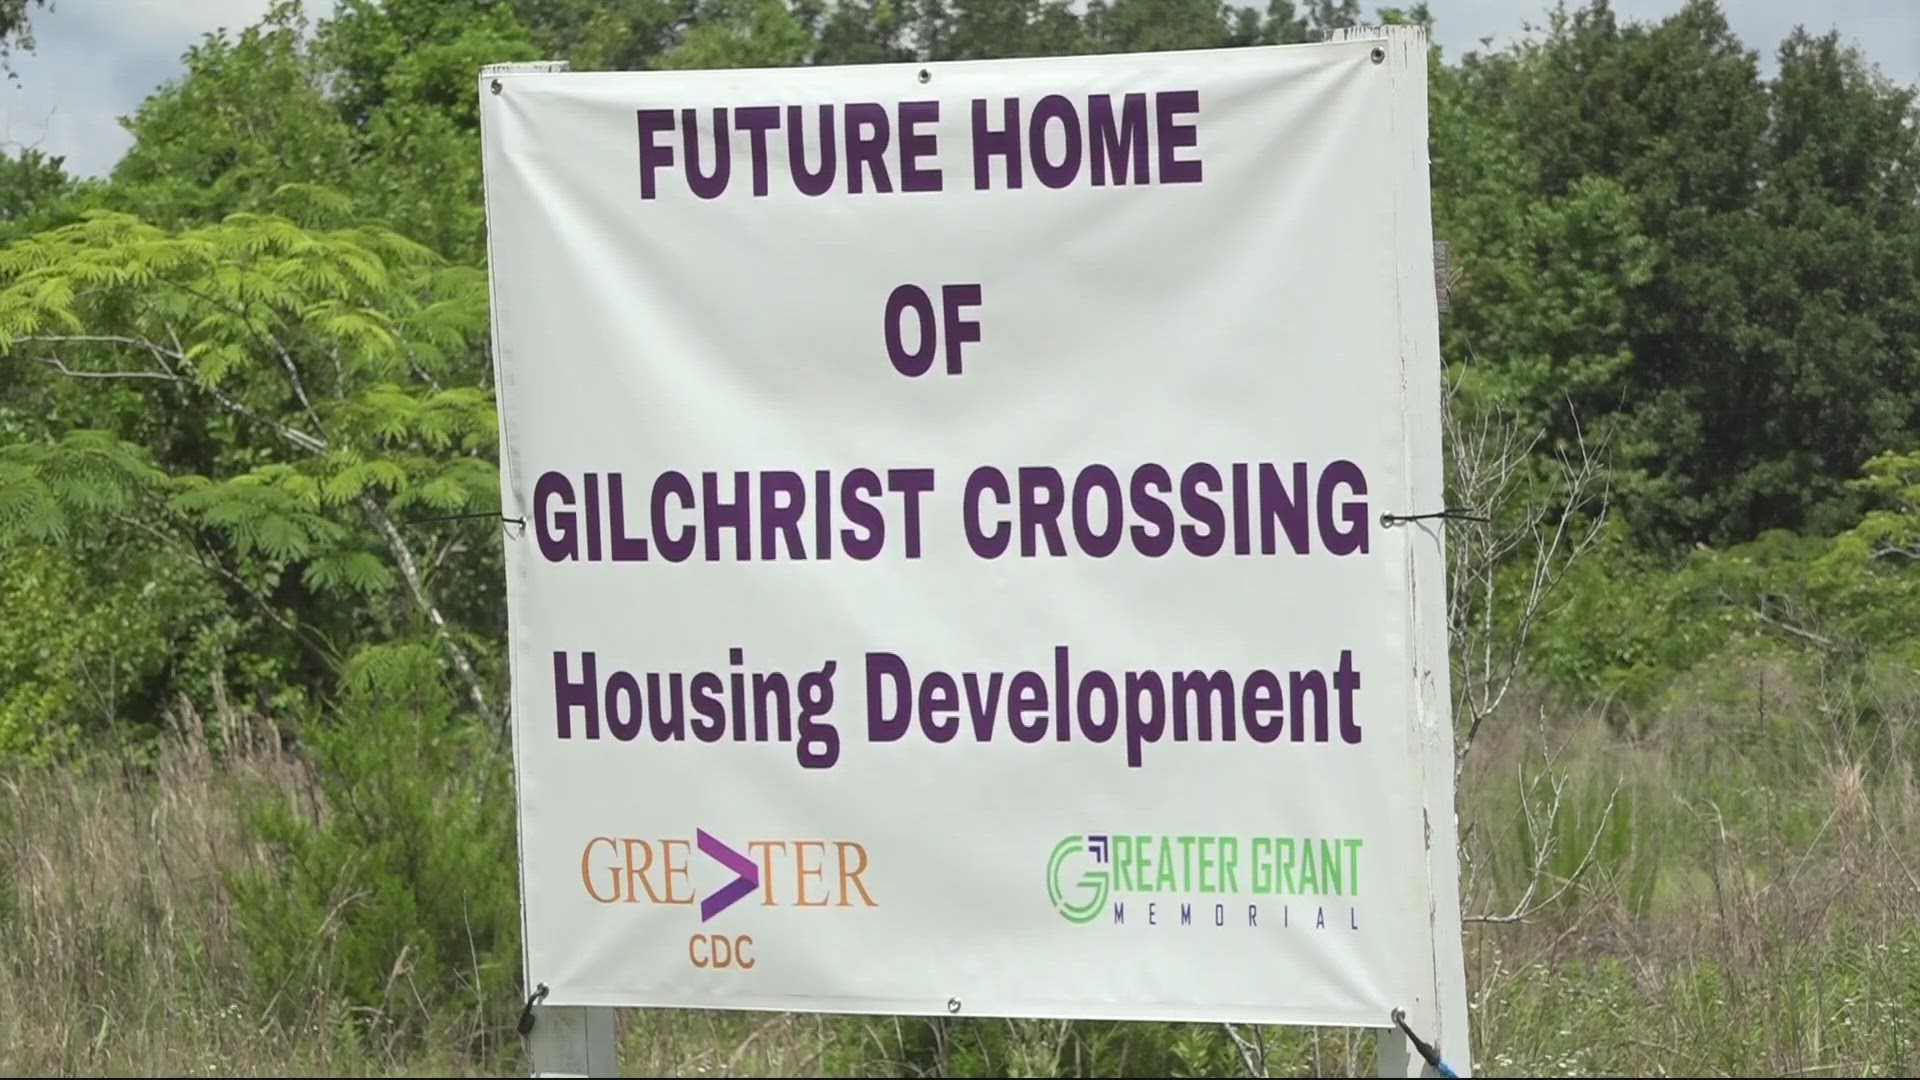 Greater Grant Memorial AME Church is breaking ground on two housing developments this year: Soutel Crossing and Gilchrist Crossing.